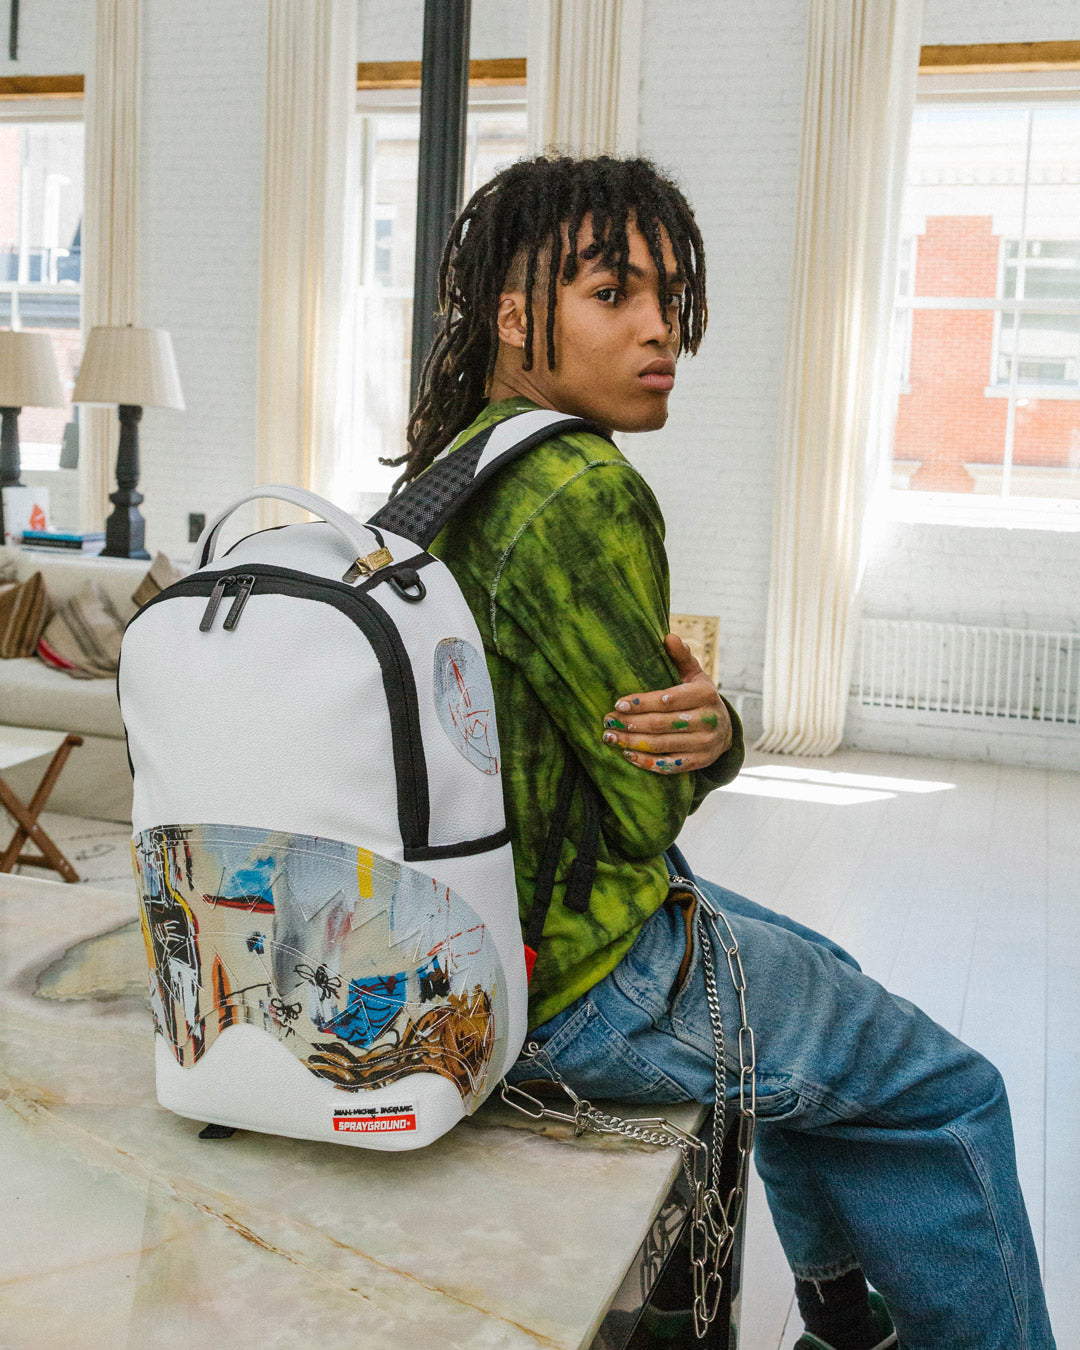 SPRAYGROUND® BACKPACK OFFICIAL BASQUIAT ACQUE PERICOLOSE 1981 BACKPACK (DLXV)